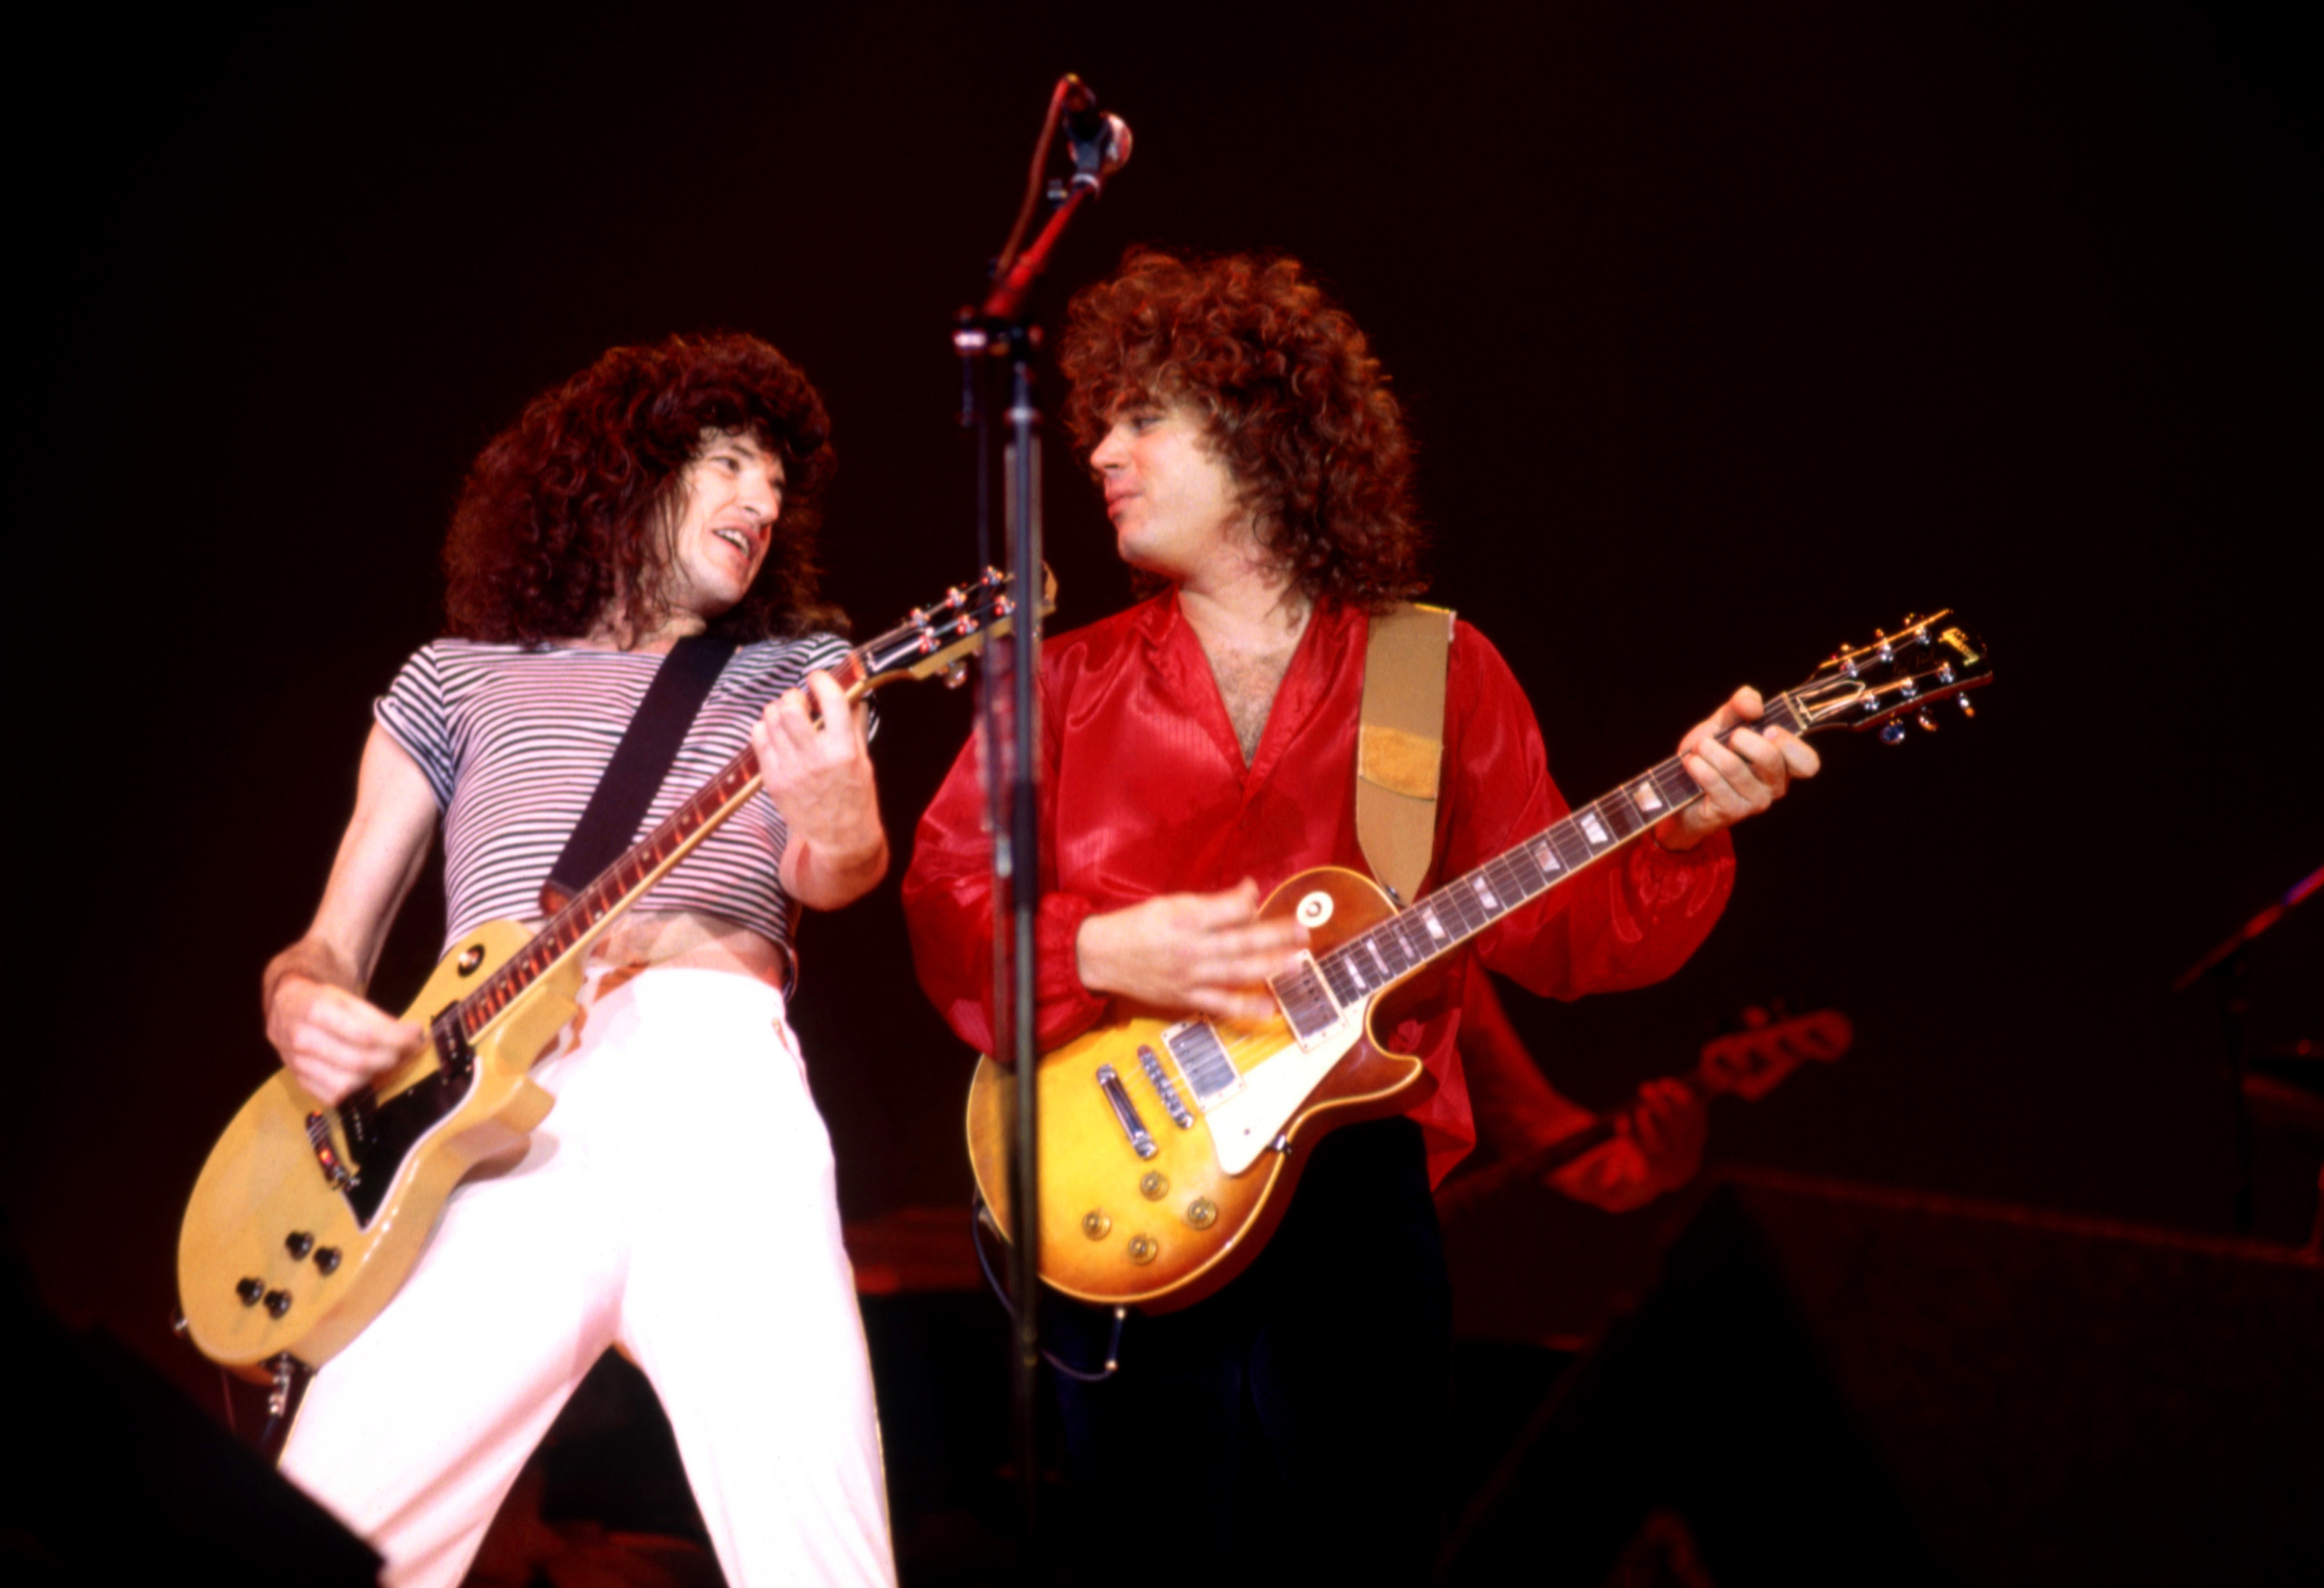 <p>The addition of two members opened the door for success within REO lore. When guitarist/songwriter Gary Richrath joined in late 1970, he helped take the band from a popular local Midwest attraction to a national story. The Richrath-penned <a href="https://www.youtube.com/watch?v=BurWYoB1XsQ">"Ridin' the Storm Out"</a> is one of the great classic rock tracks. </p><p>Meanwhile, Kevin Cronin joined the group in 1972, left, and returned in 1975. The Cronin-Richrath songwriting duo brought the band much more commercial success with <a href="https://www.youtube.com/watch?v=jeHkaSH0Xw8"><em>You Can Tune a Piano, but You Can't Tuna Fish</em> (1978)</a> and turned them into mainstream, pop-rock giants via <a href="https://www.youtube.com/watch?v=wJzNZ1c5C9c"><em>Hi Infidelity </em>(1980</a>). Following the latter, Cronin steered the band in a <a href="https://www.youtube.com/watch?v=zpOULjyy-n8">more soft rock direction</a>, leading to Richrath's departure in the late 1980s. </p>